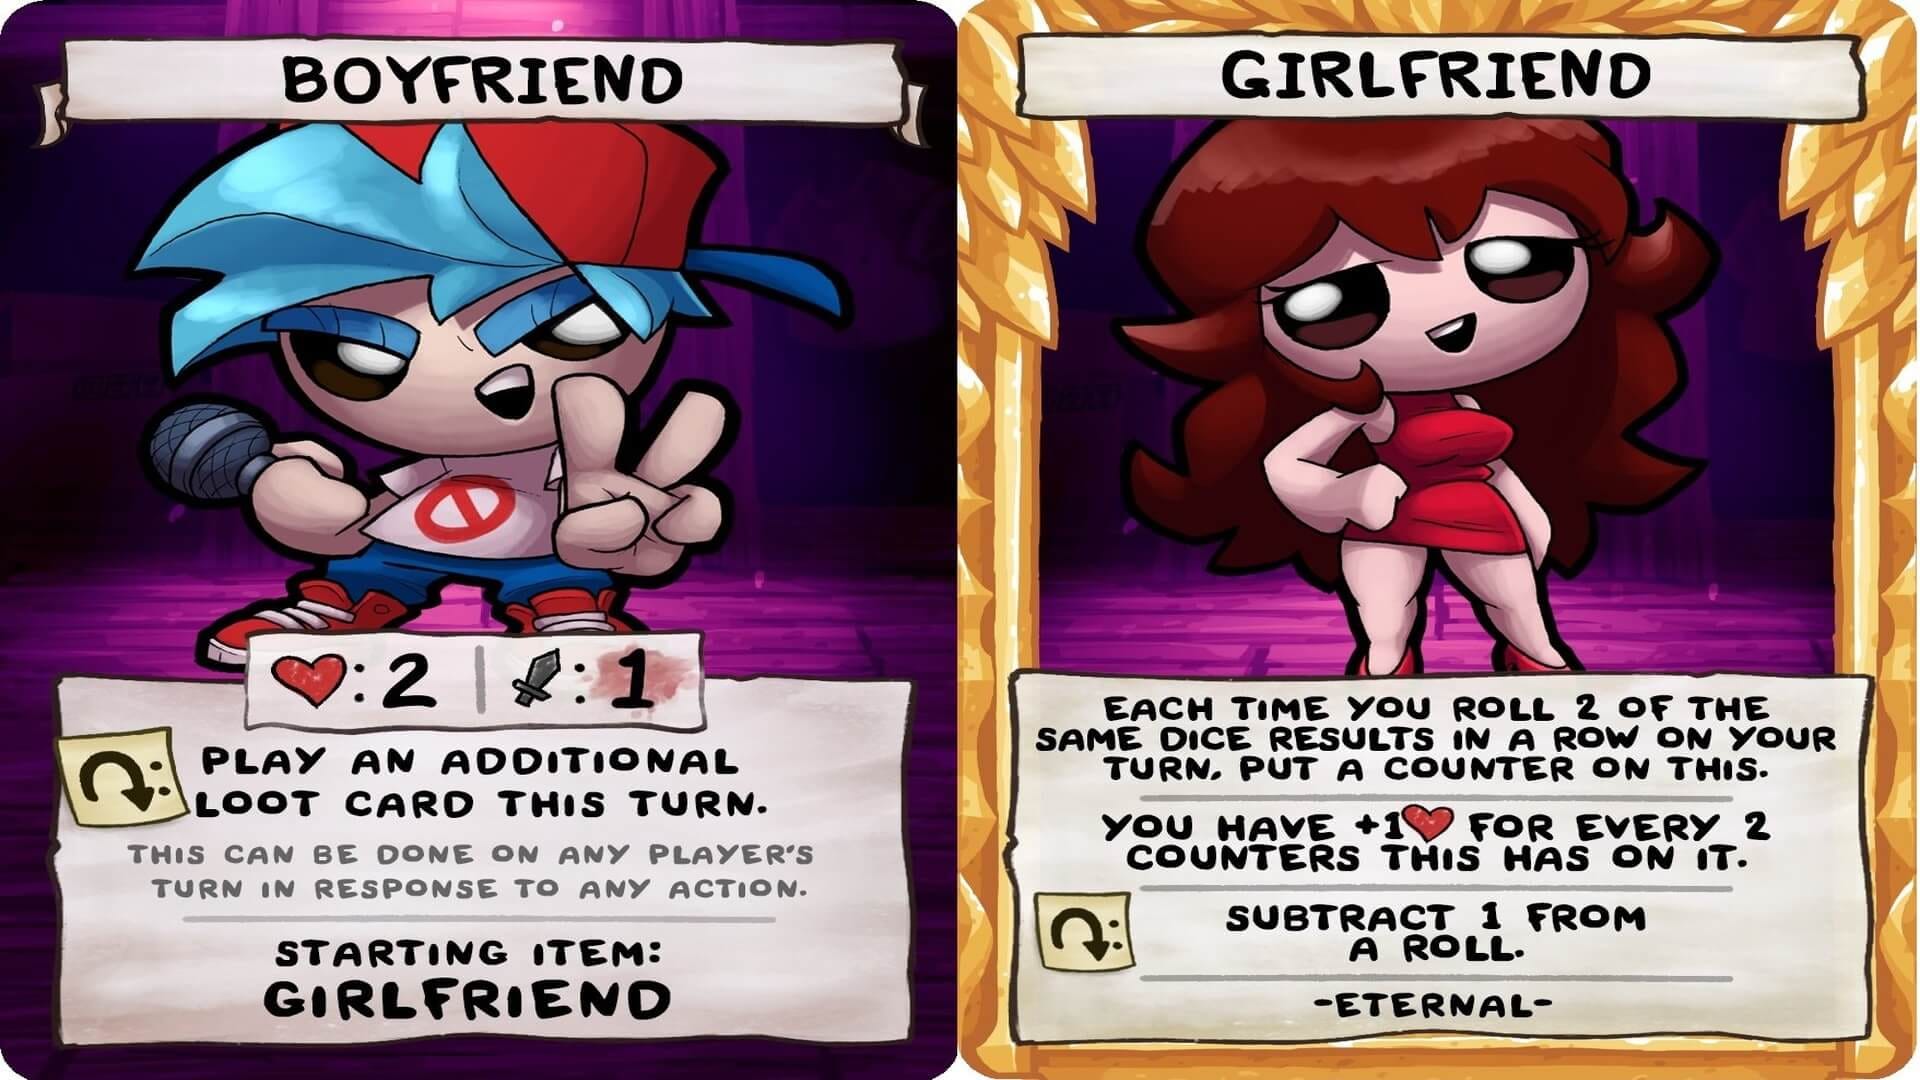 The Boyfriend and Girlfriend cards in Binding of Isaac Requiem.